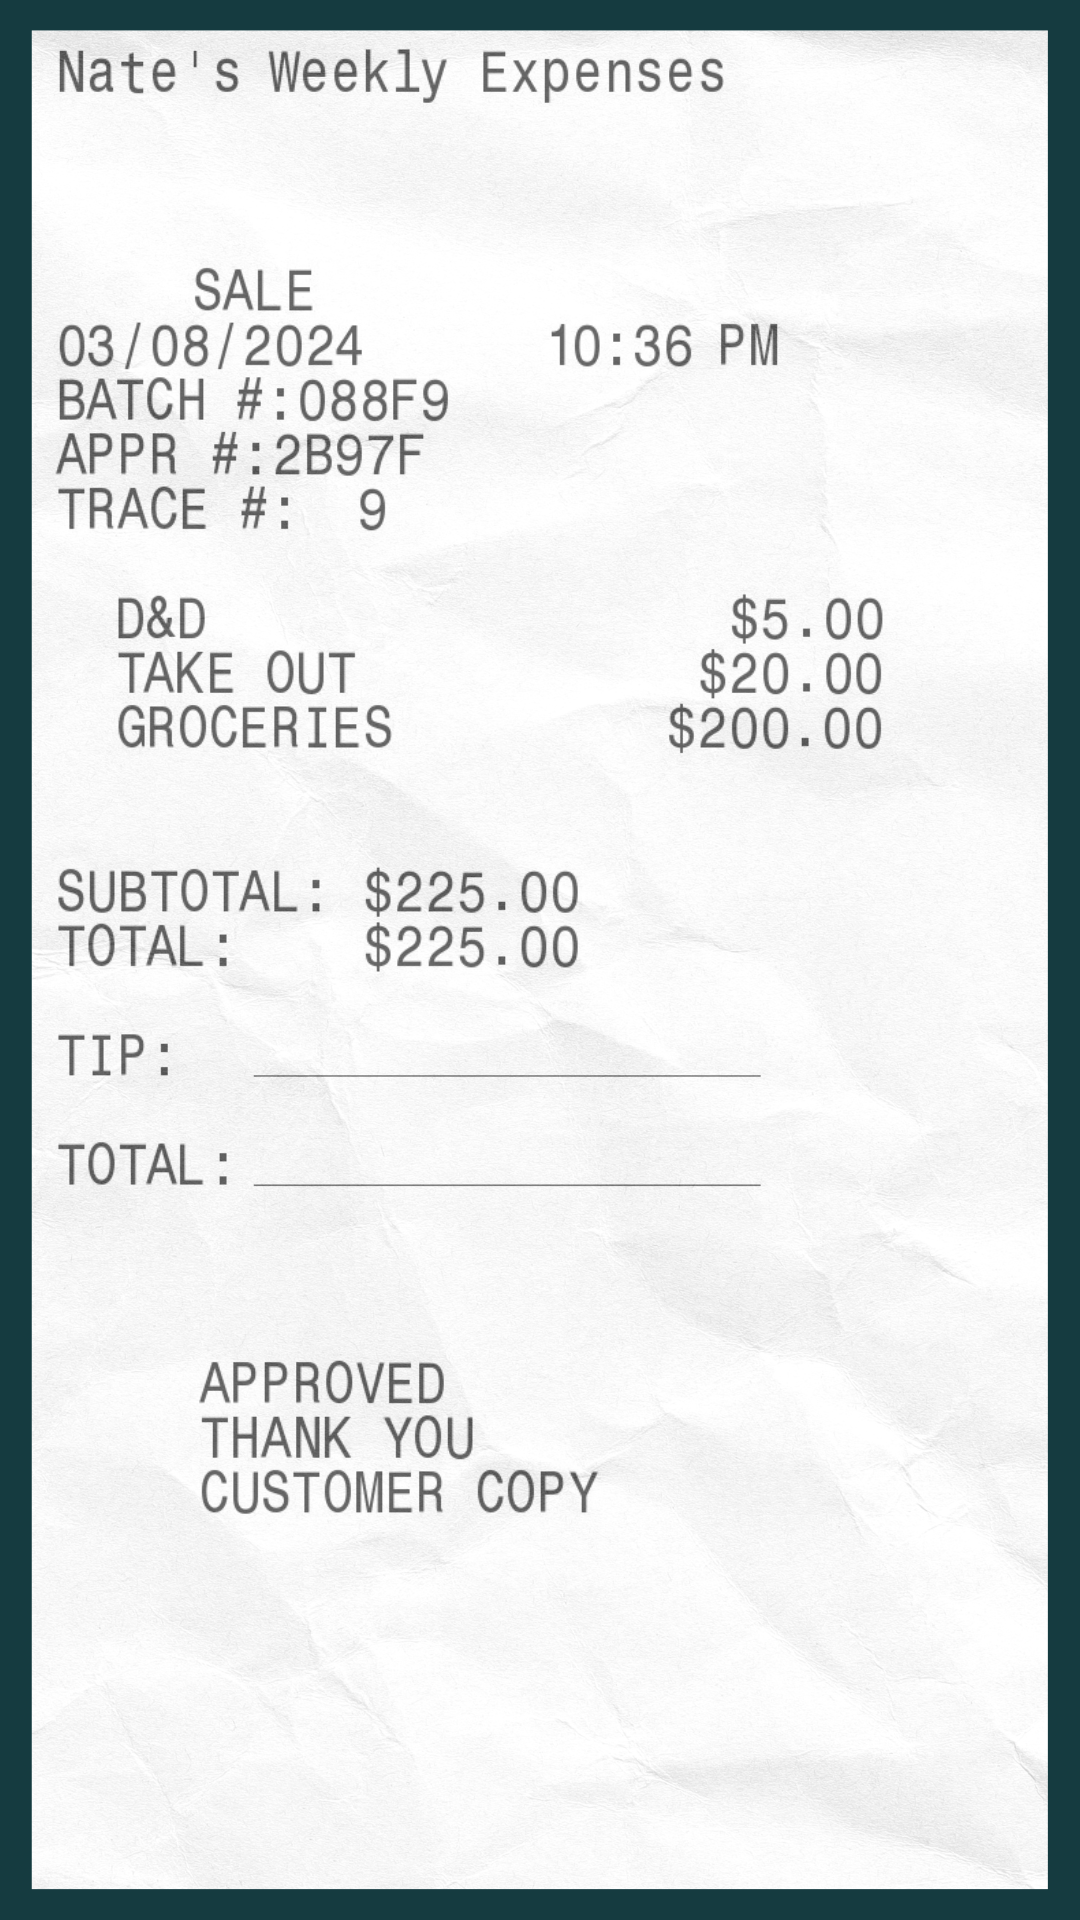 Receipt showing weekly expenses with dine-out food costs totaling $225.00